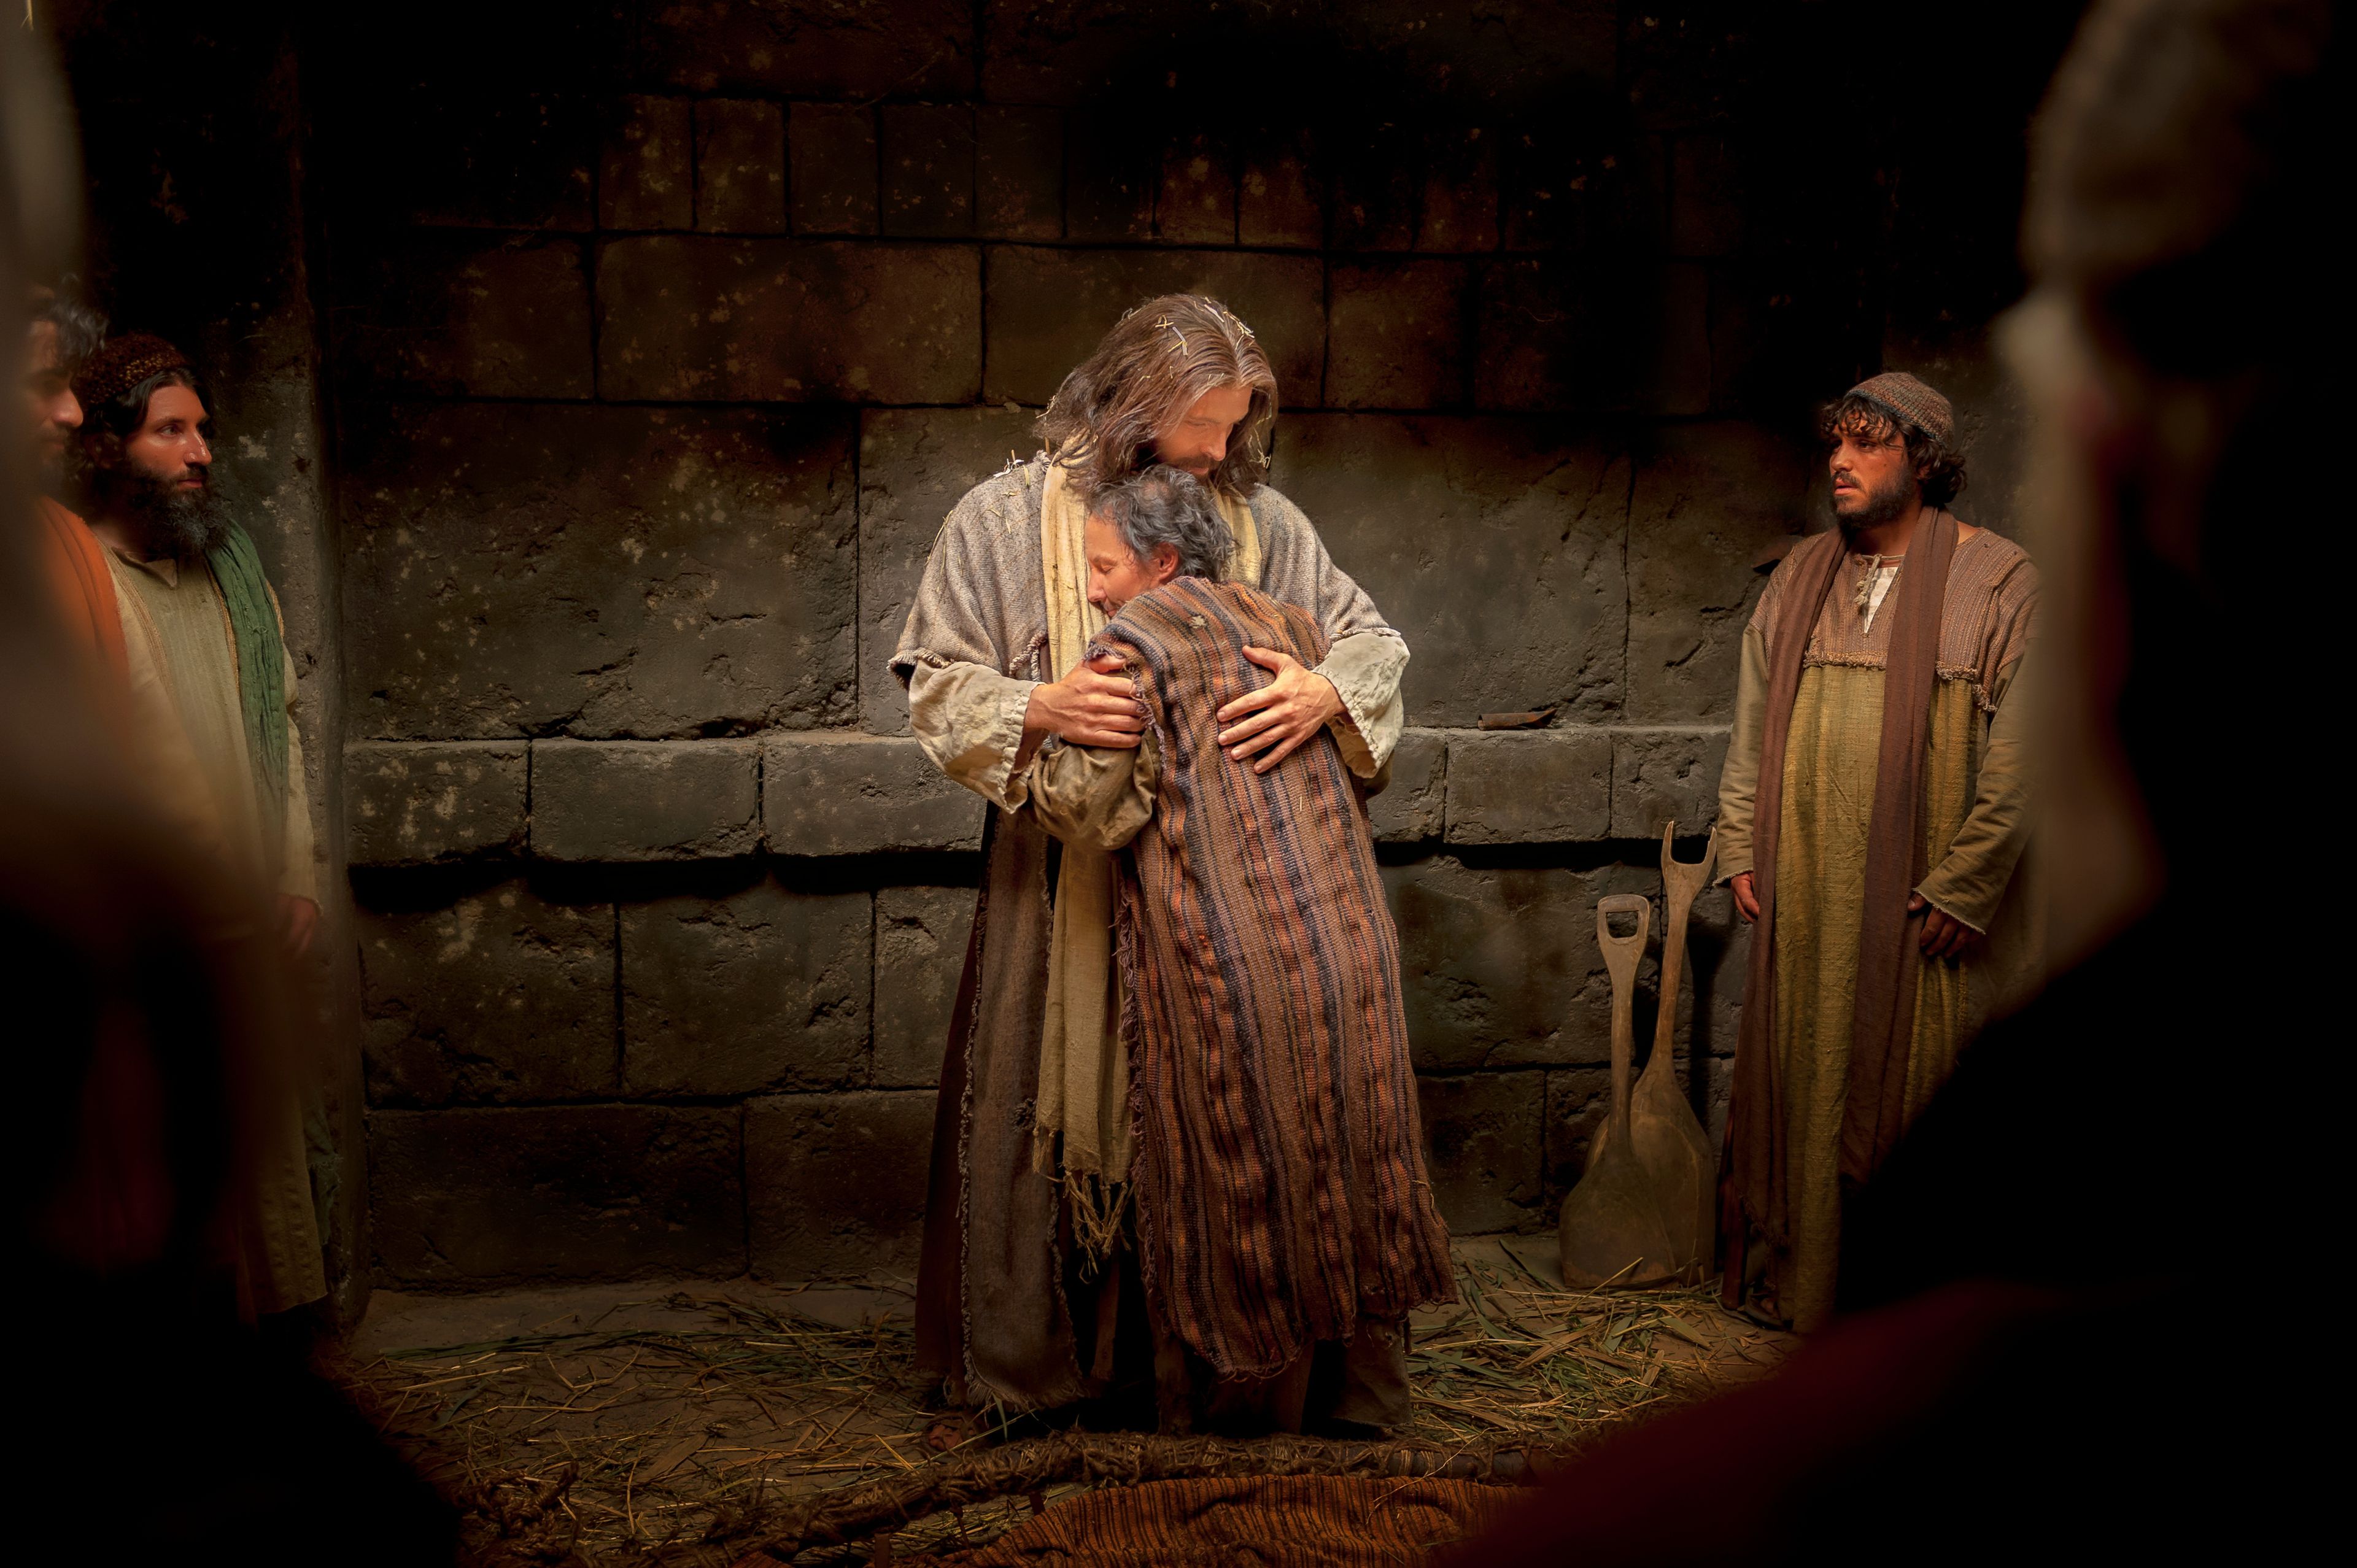 A man standing and embracing Christ after being healed.